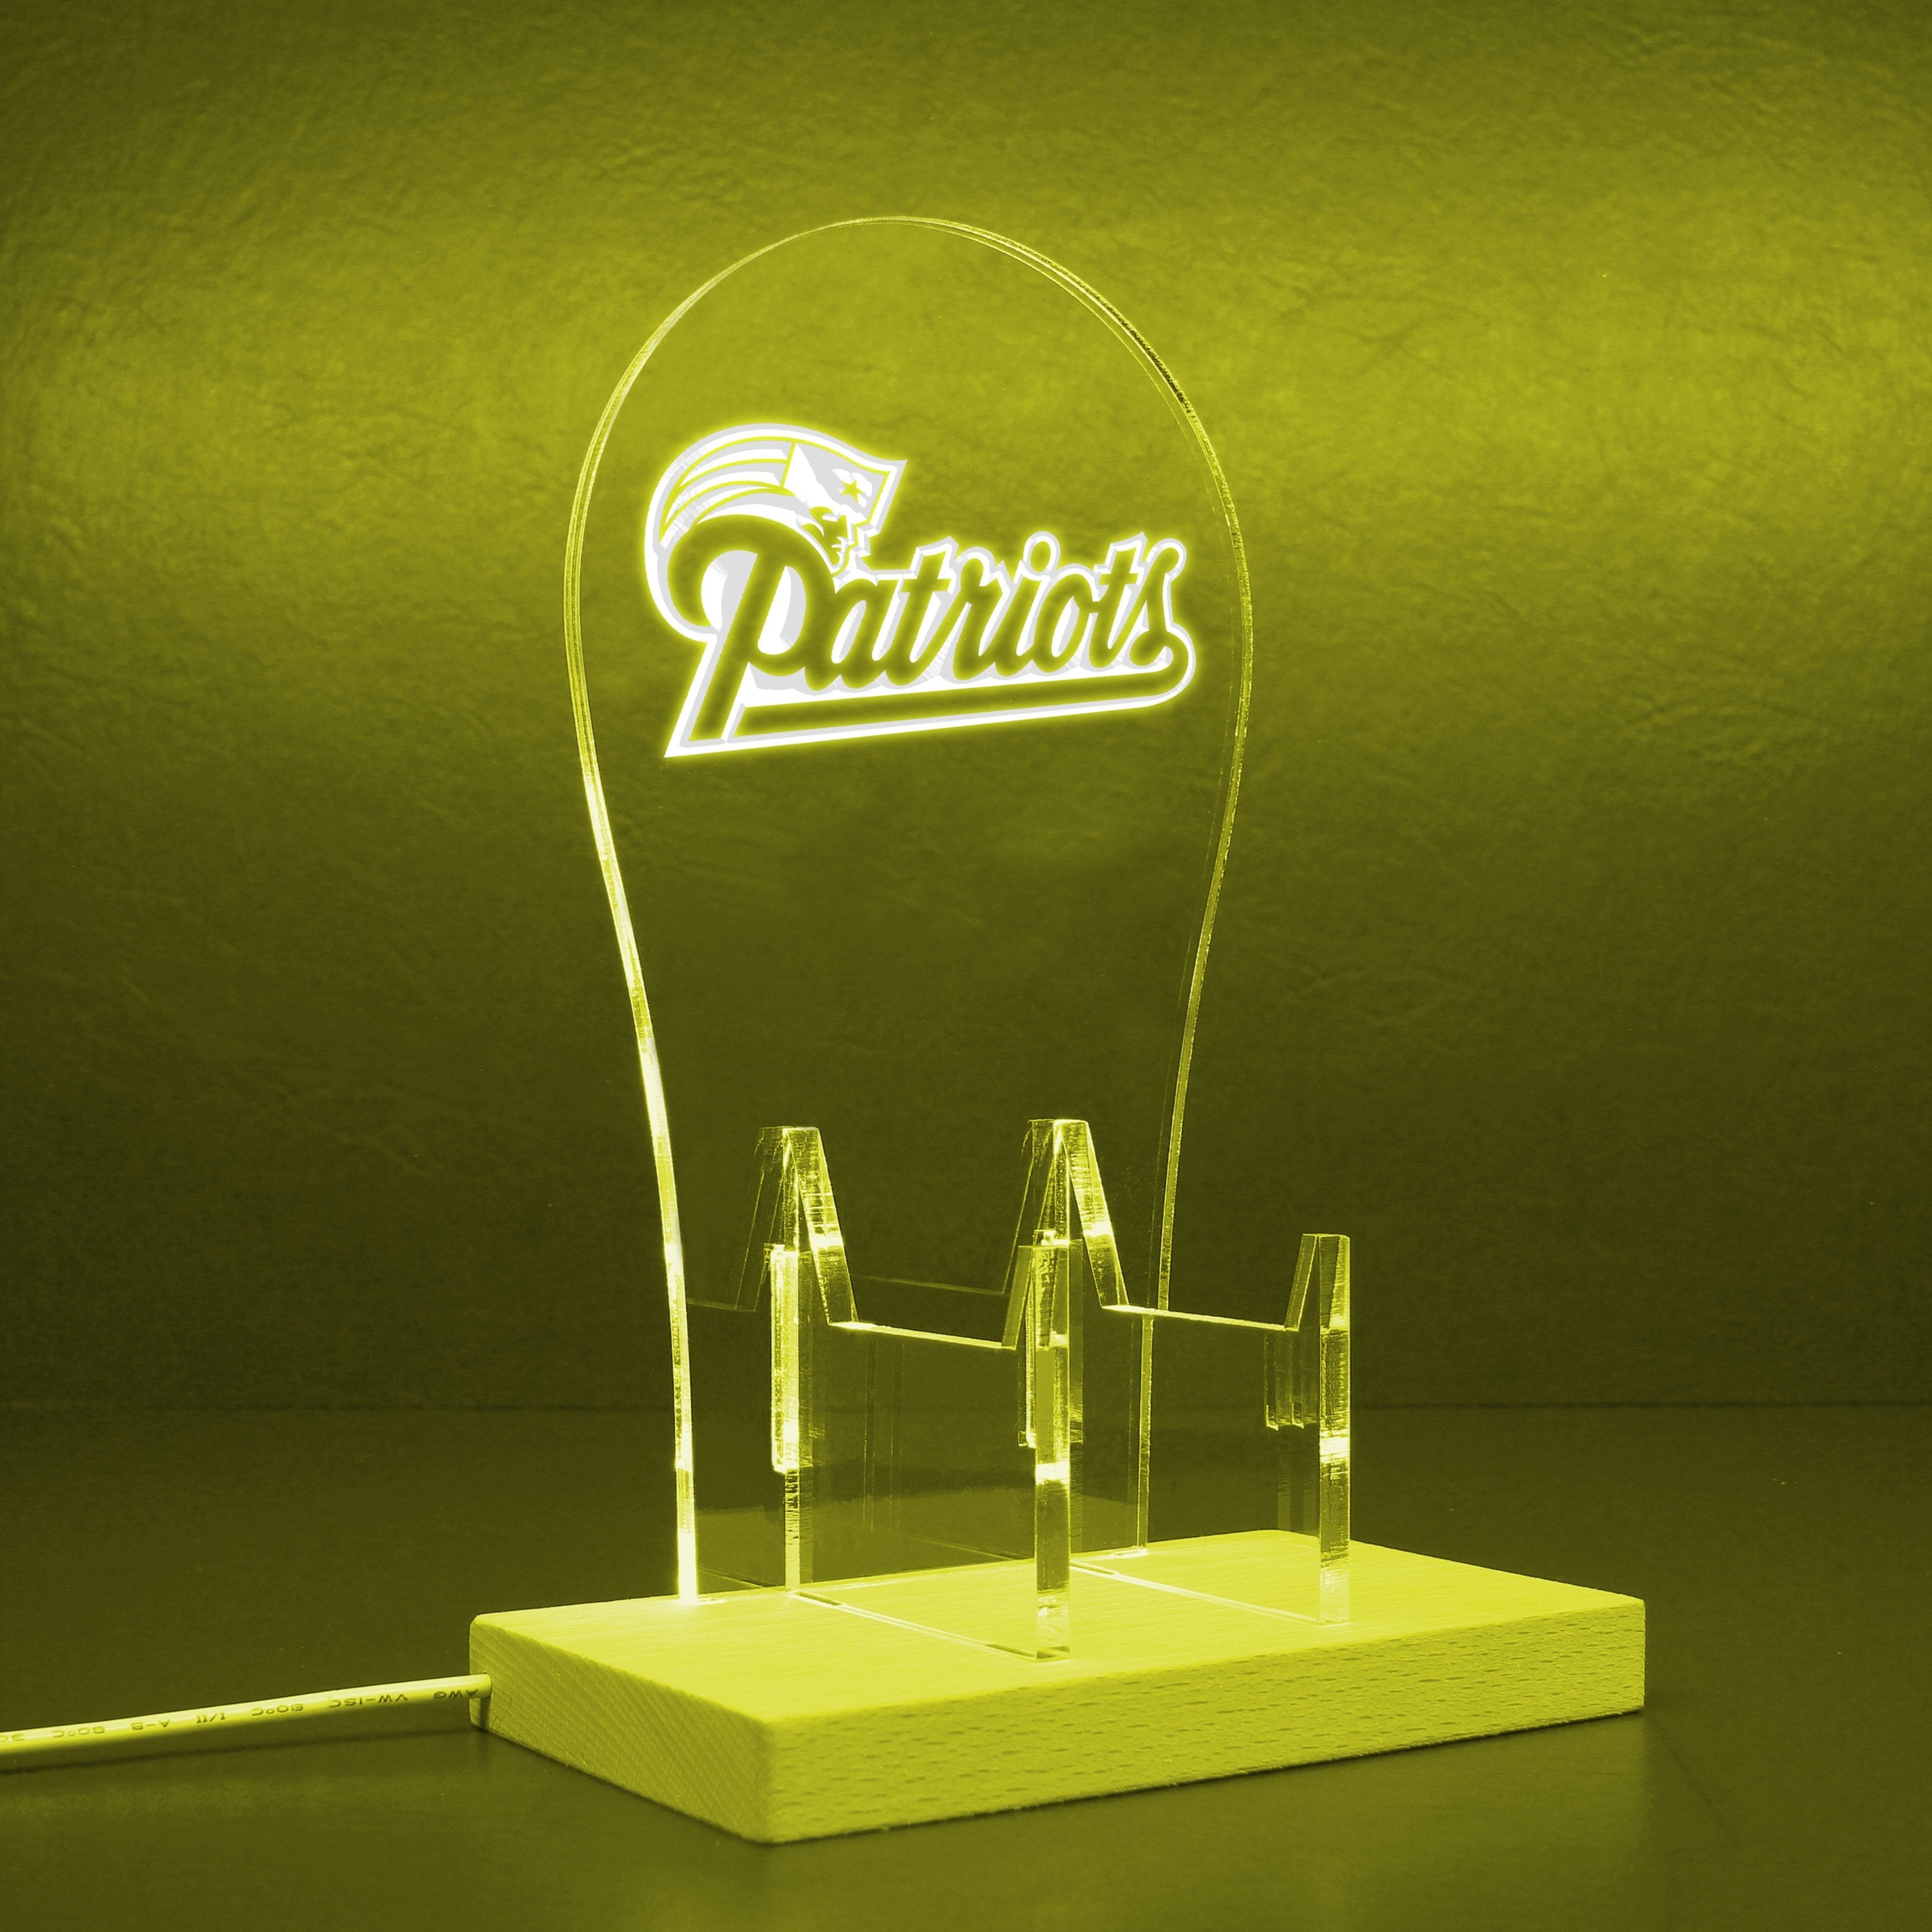 New England Patriots LED Gaming Headset Controller Stand